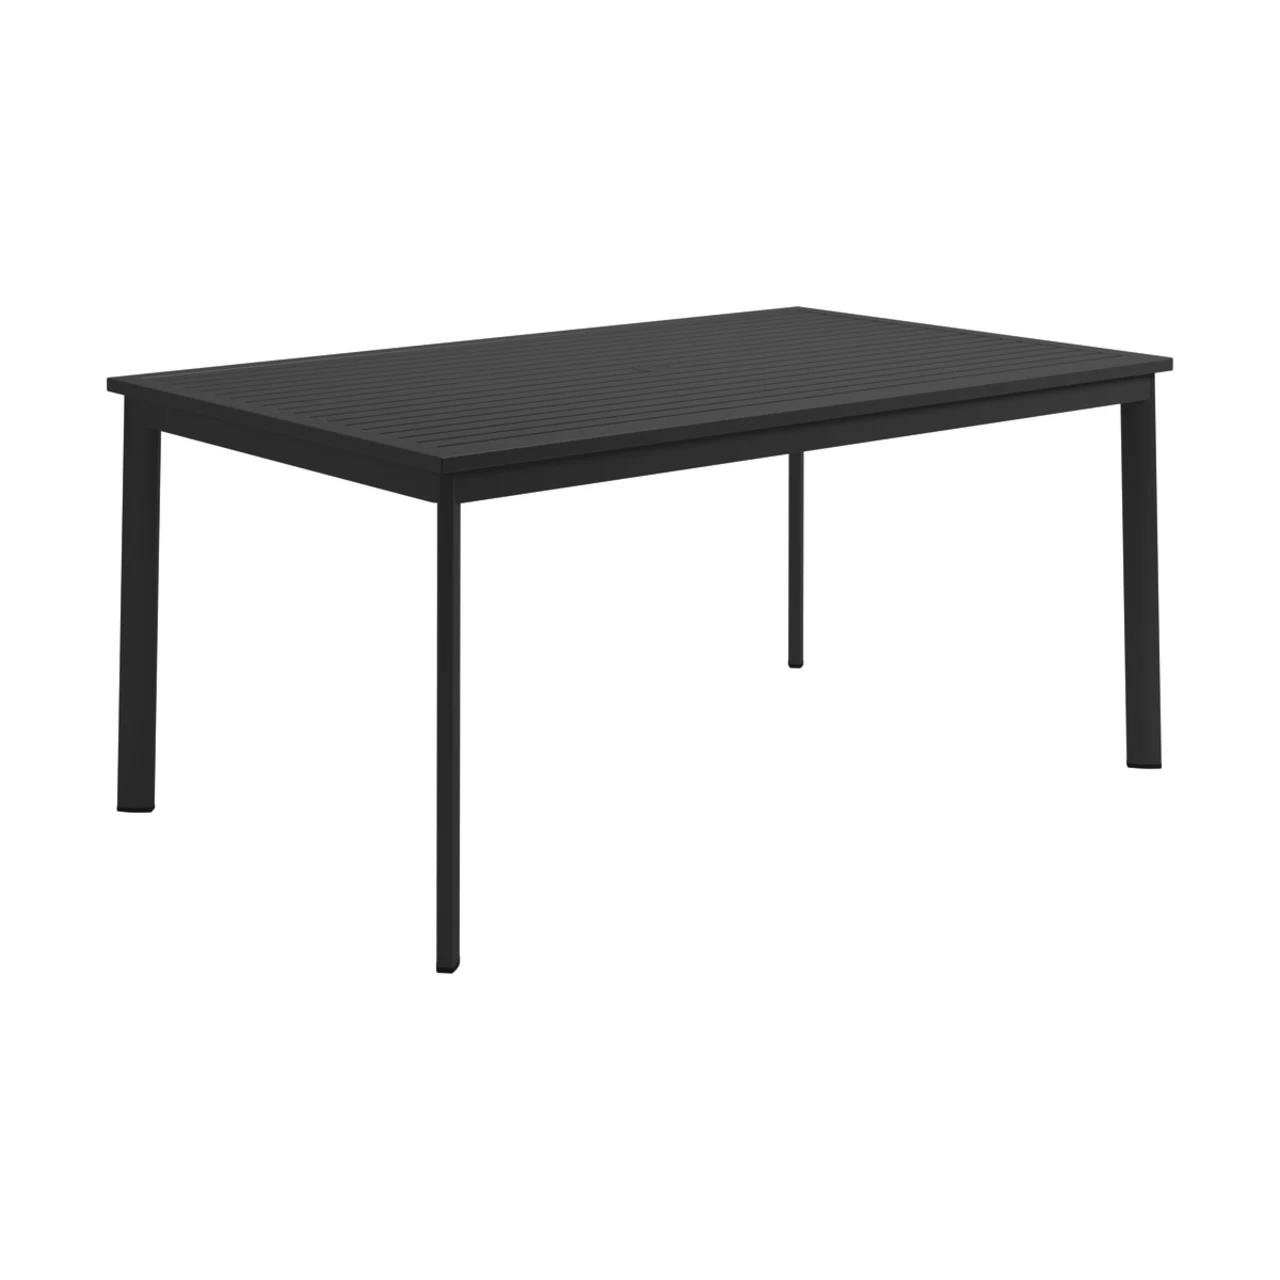 Metz 63" Dining Table: Aluminum Table Top